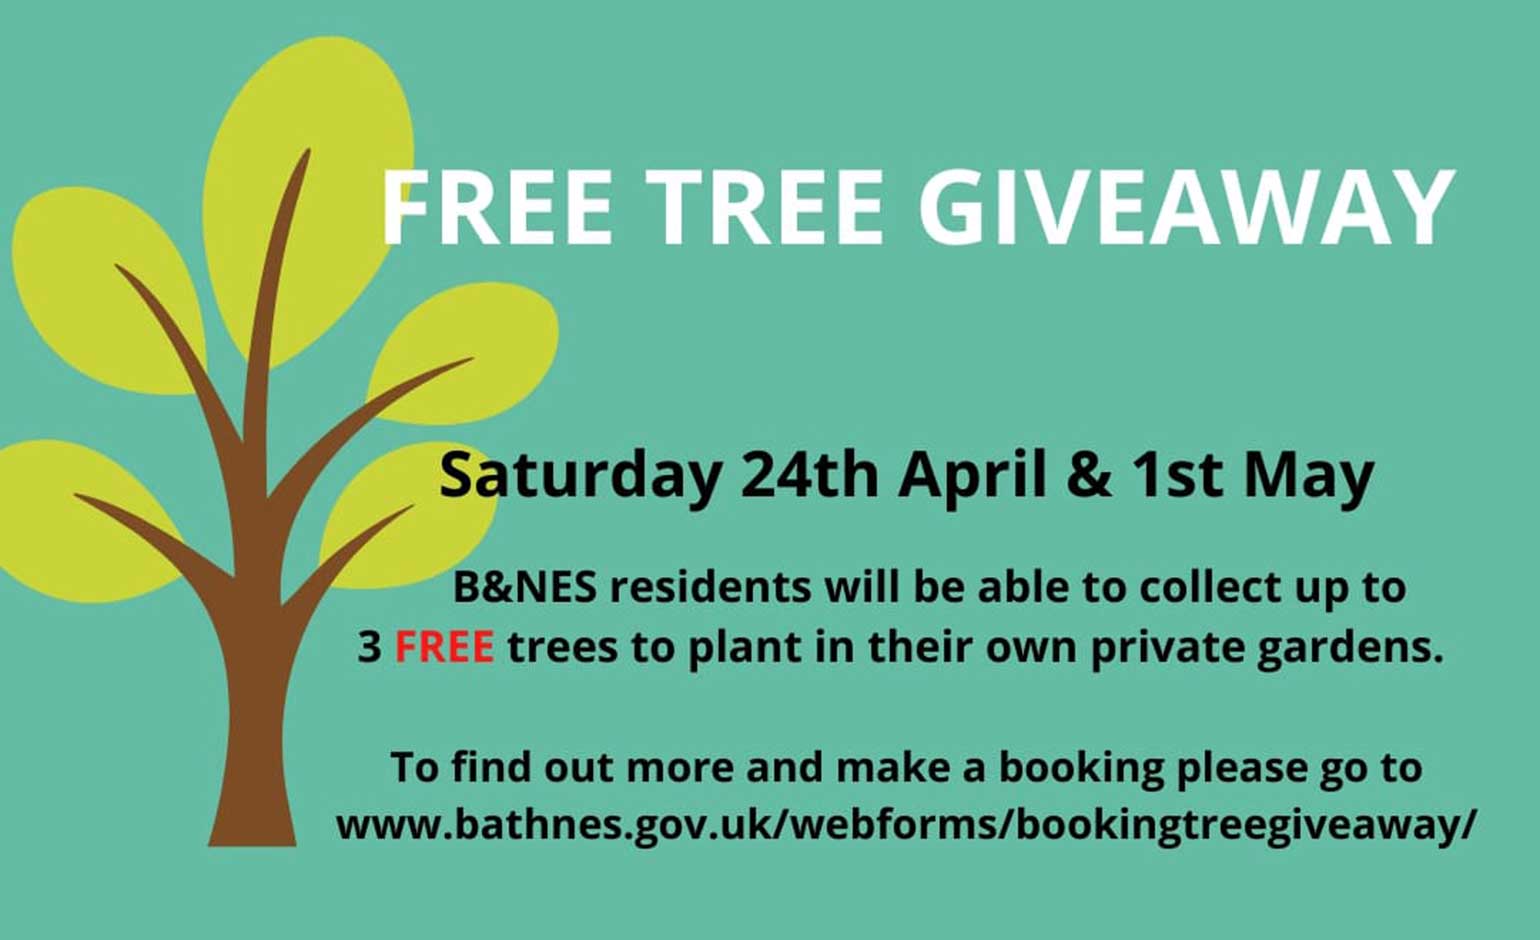 Free trees being given away to residents as part of drive to increase